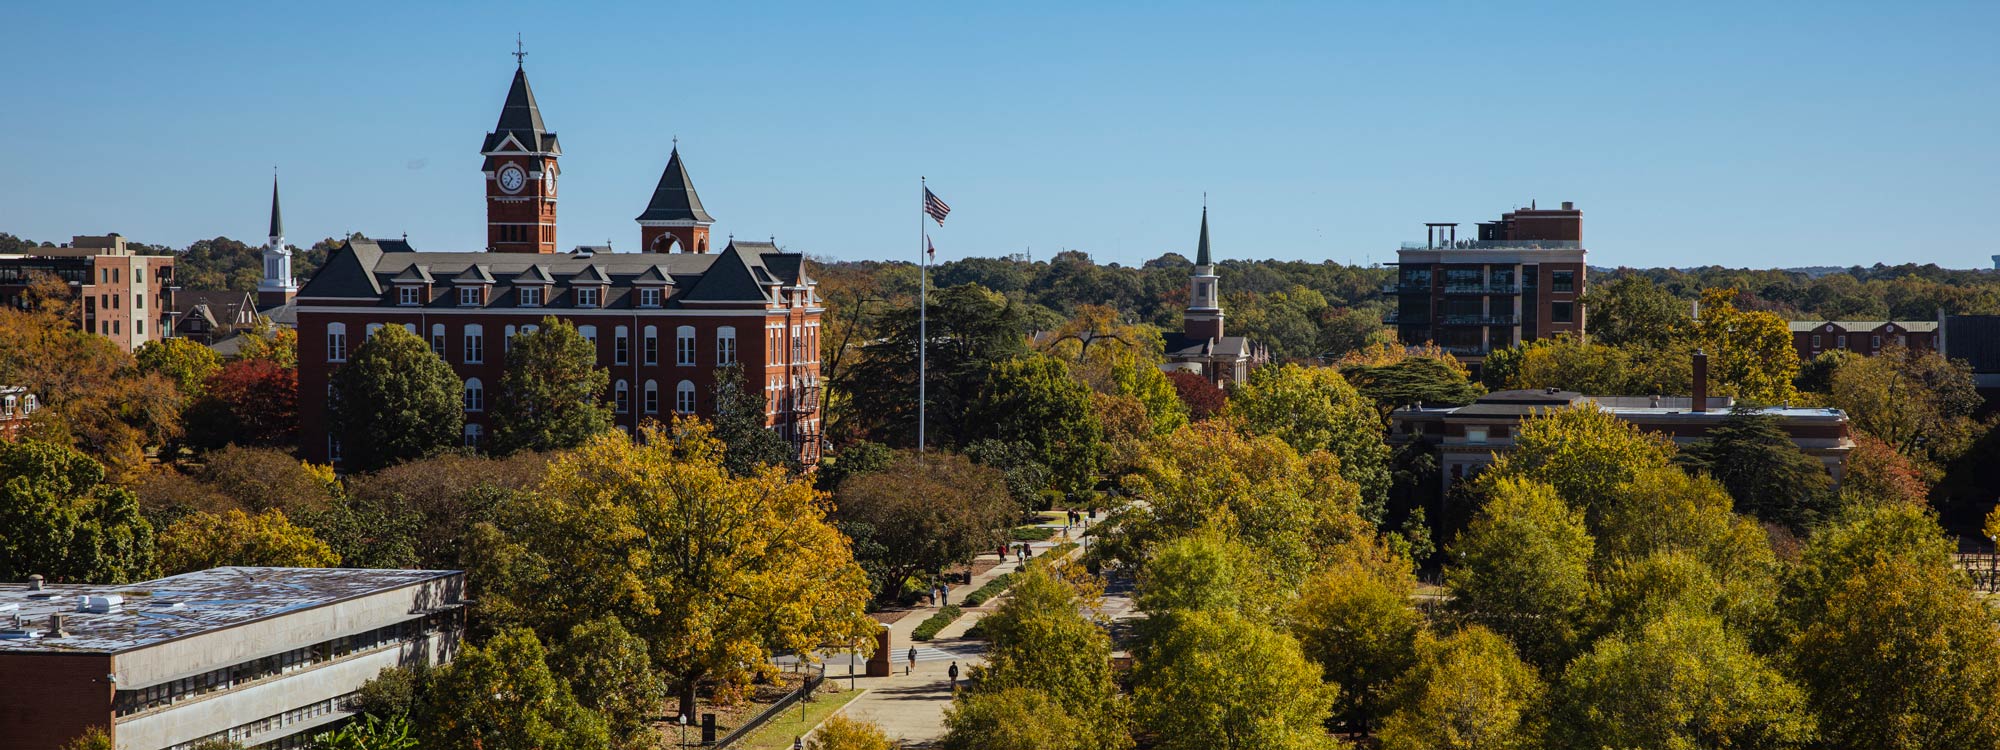 Auburn University Campus from an elevated view